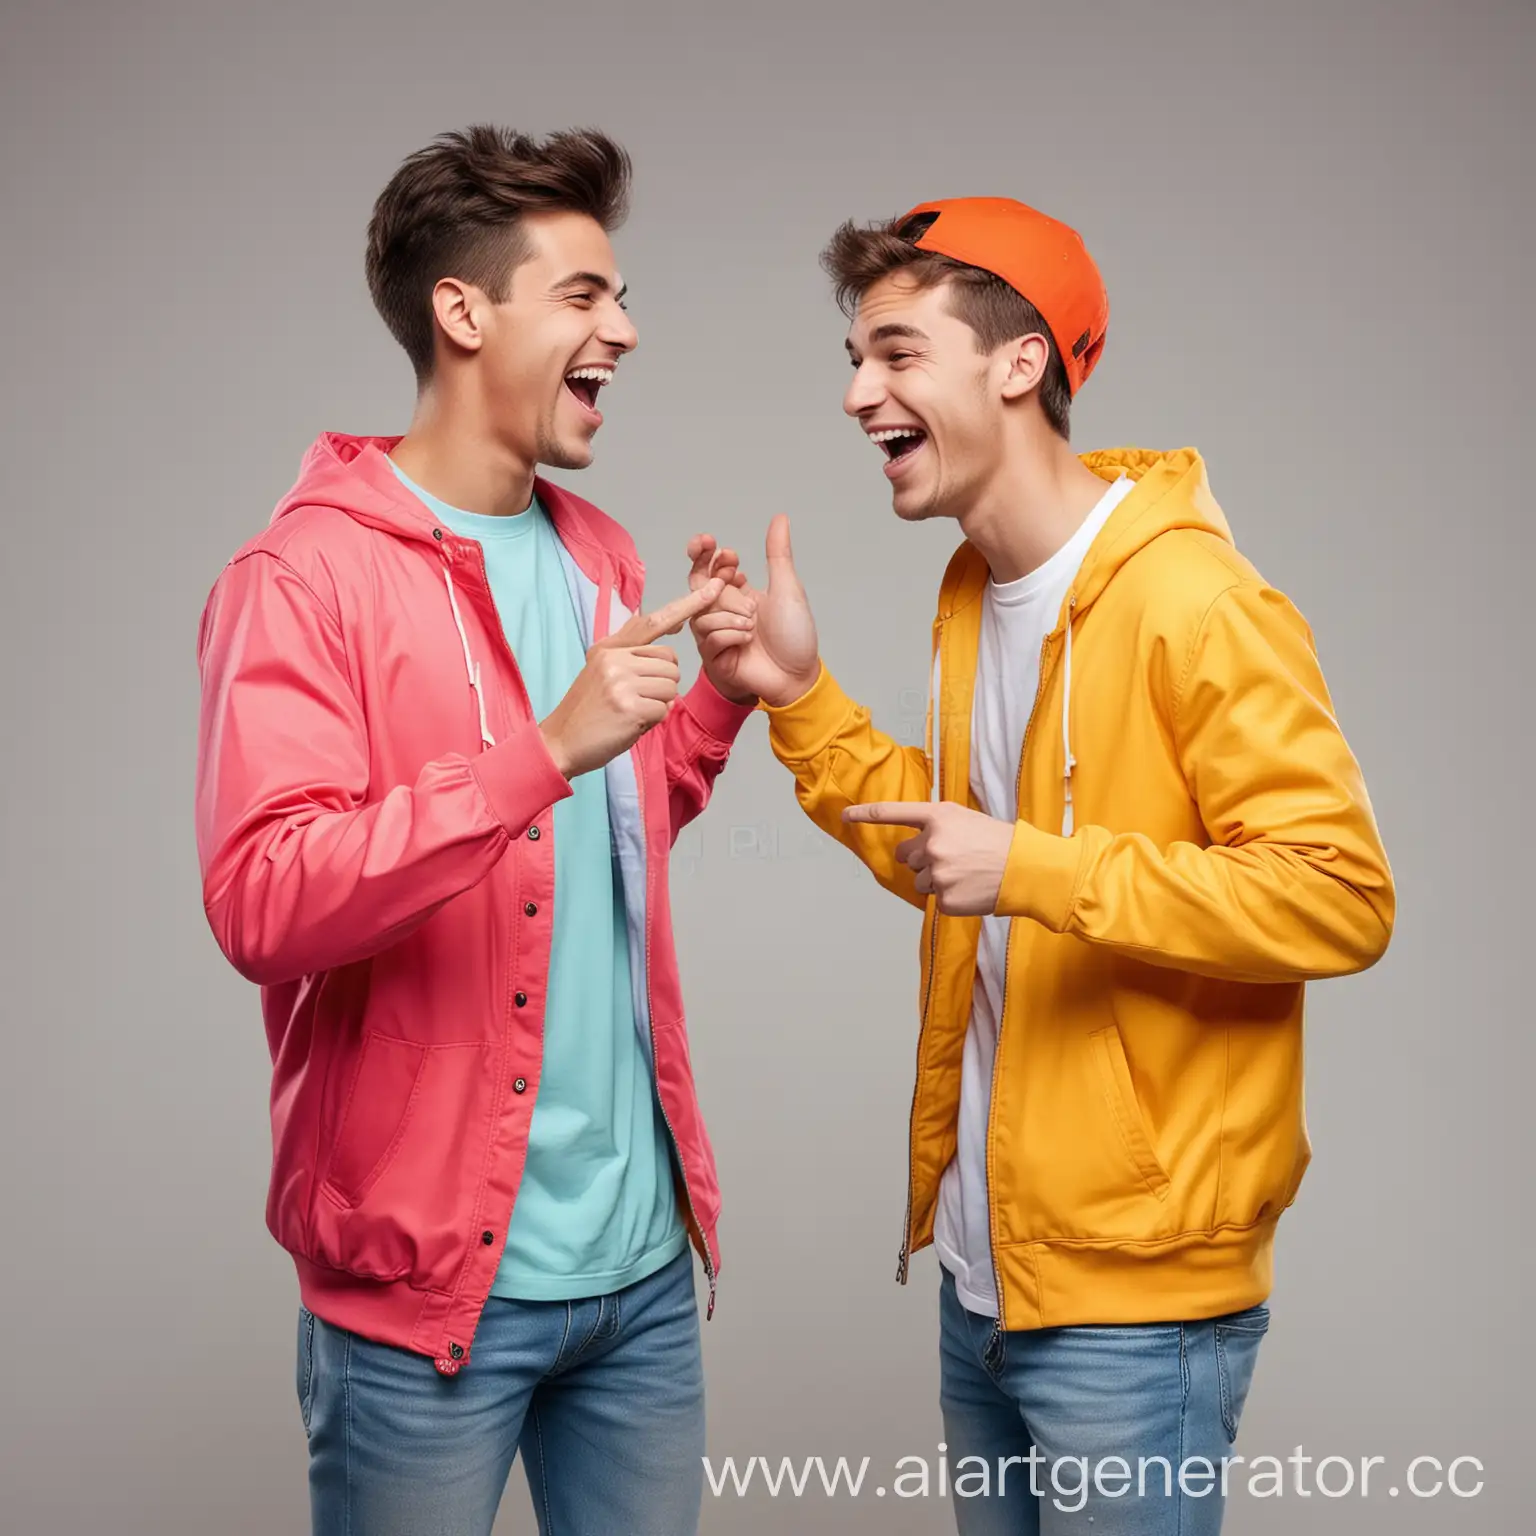 Dynamic-Conversation-between-Two-Young-Men-in-Vibrant-Attire